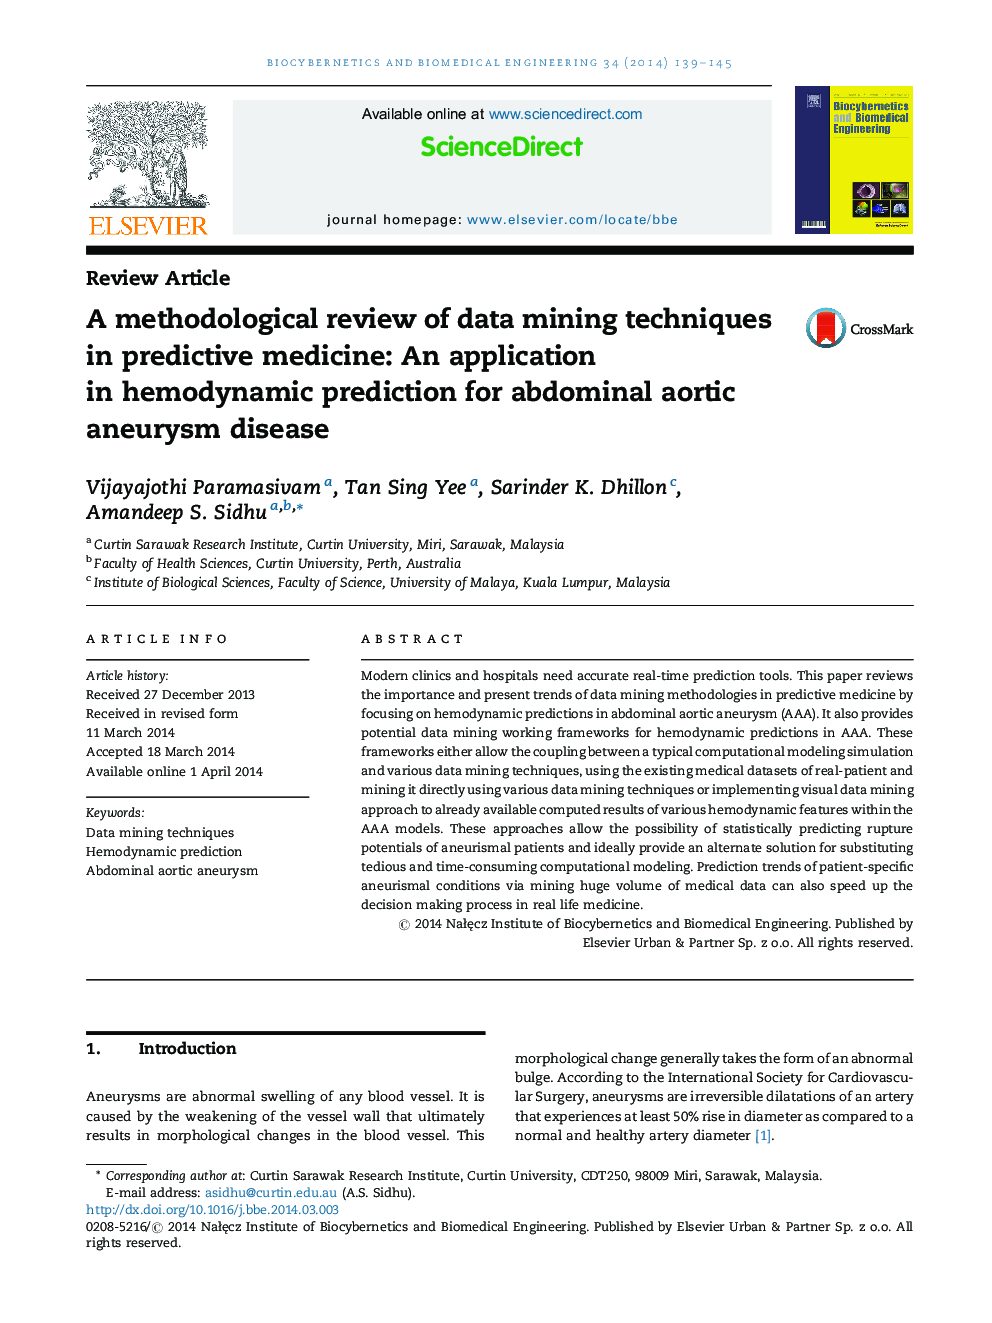 A methodological review of data mining techniques in predictive medicine: An application in hemodynamic prediction for abdominal aortic aneurysm disease